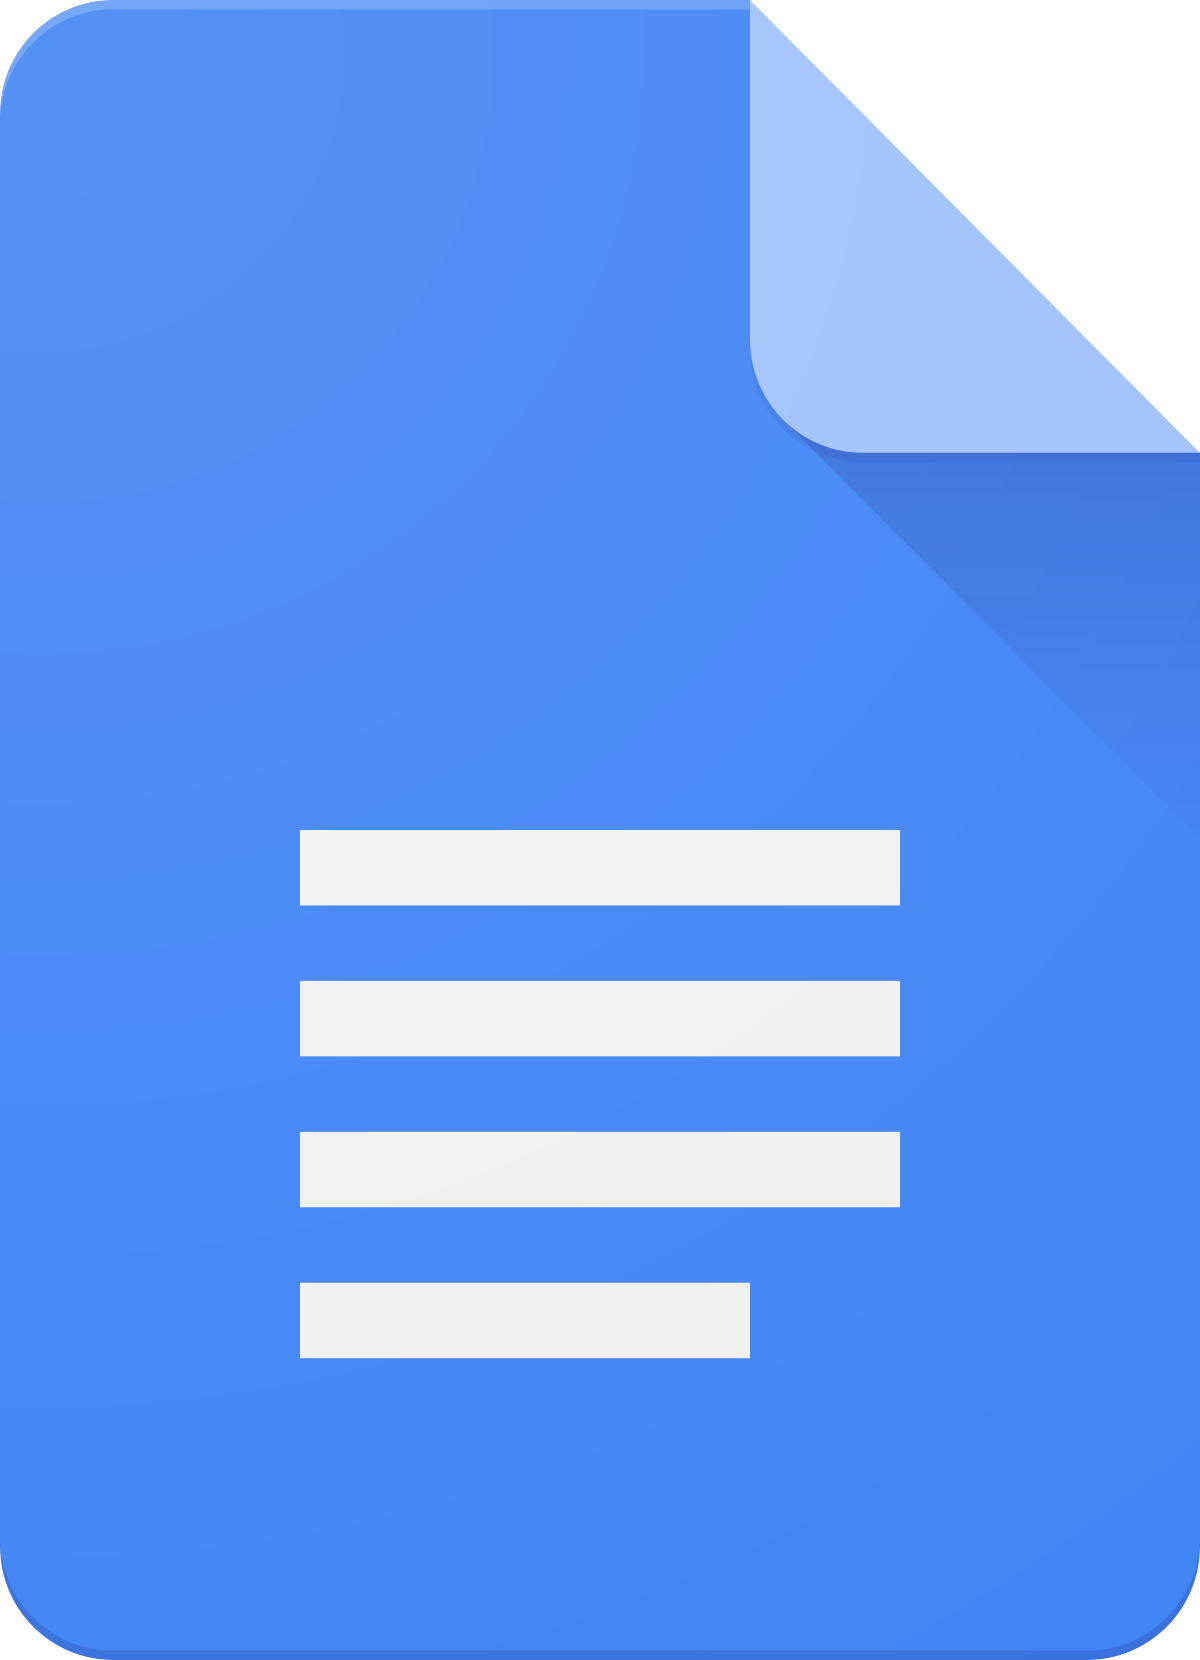 How to Add Headings in Google Docs?